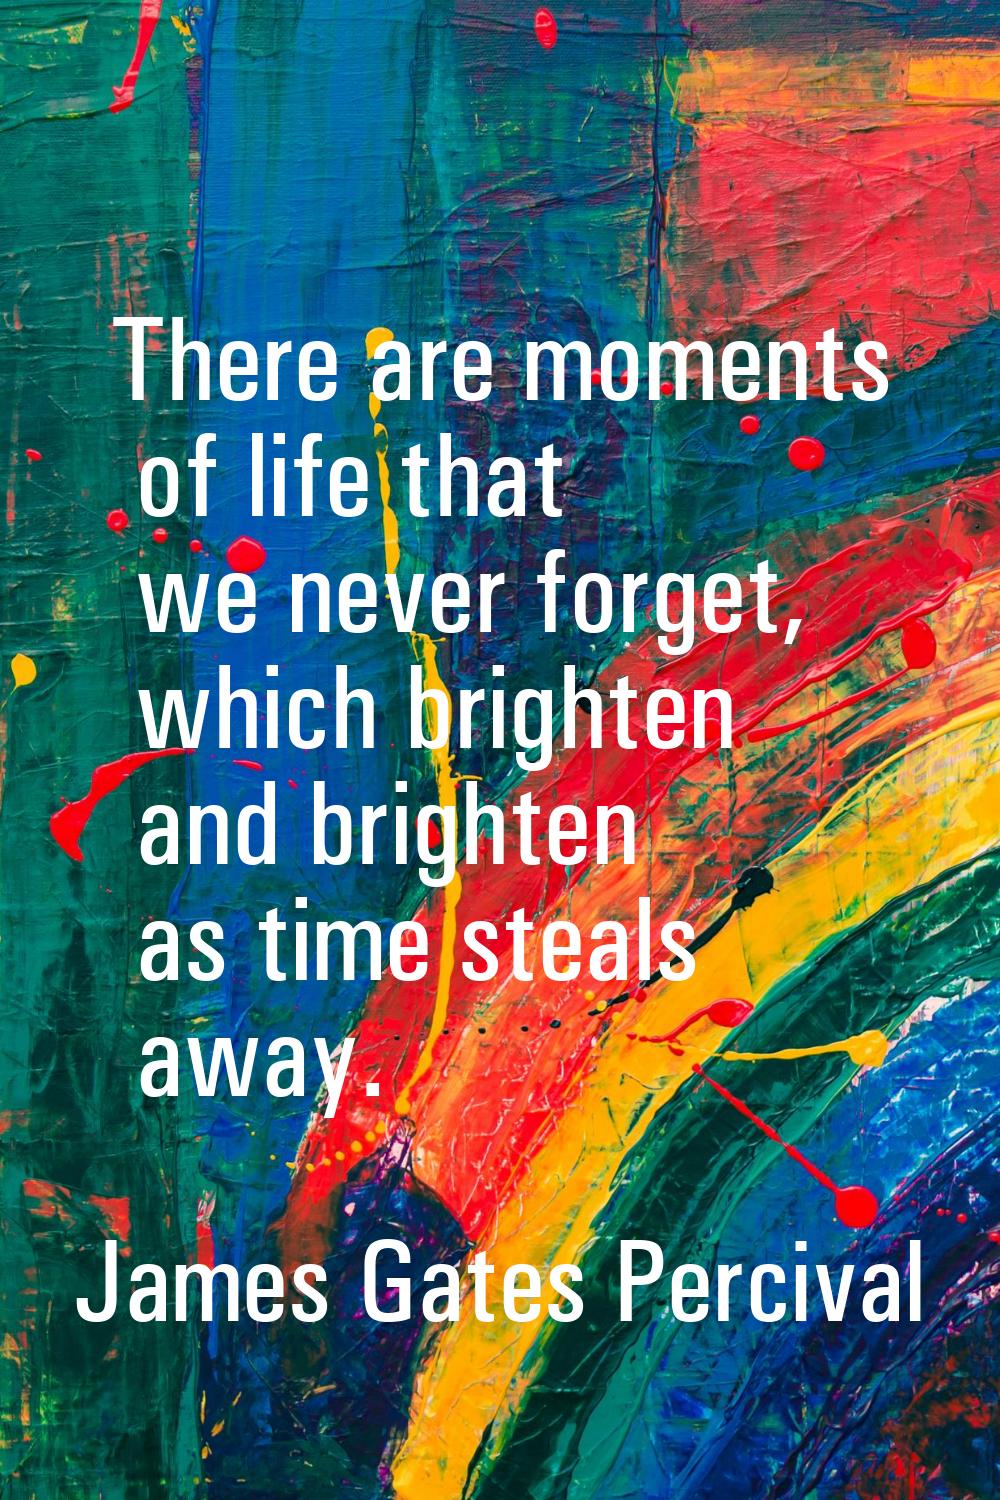 There are moments of life that we never forget, which brighten and brighten as time steals away.